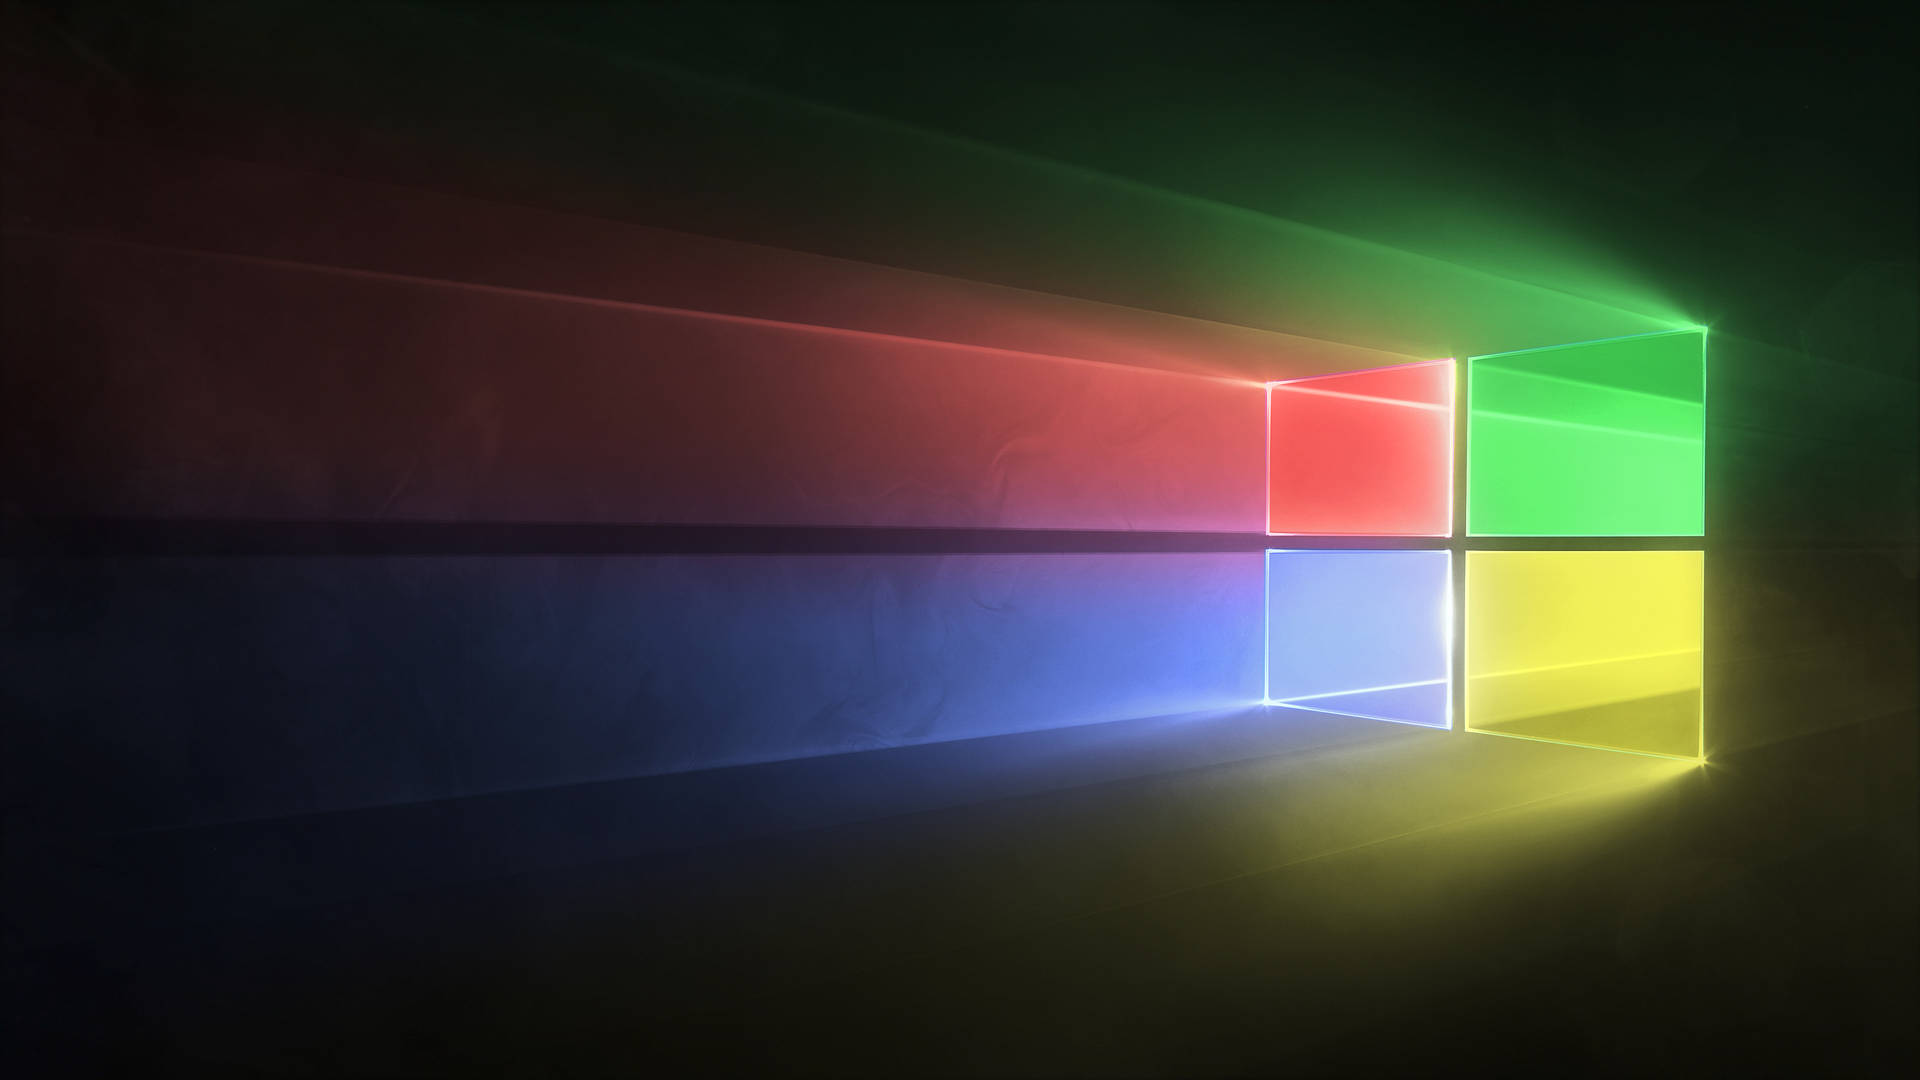 100+ Windows 10 HD Wallpapers and Backgrounds